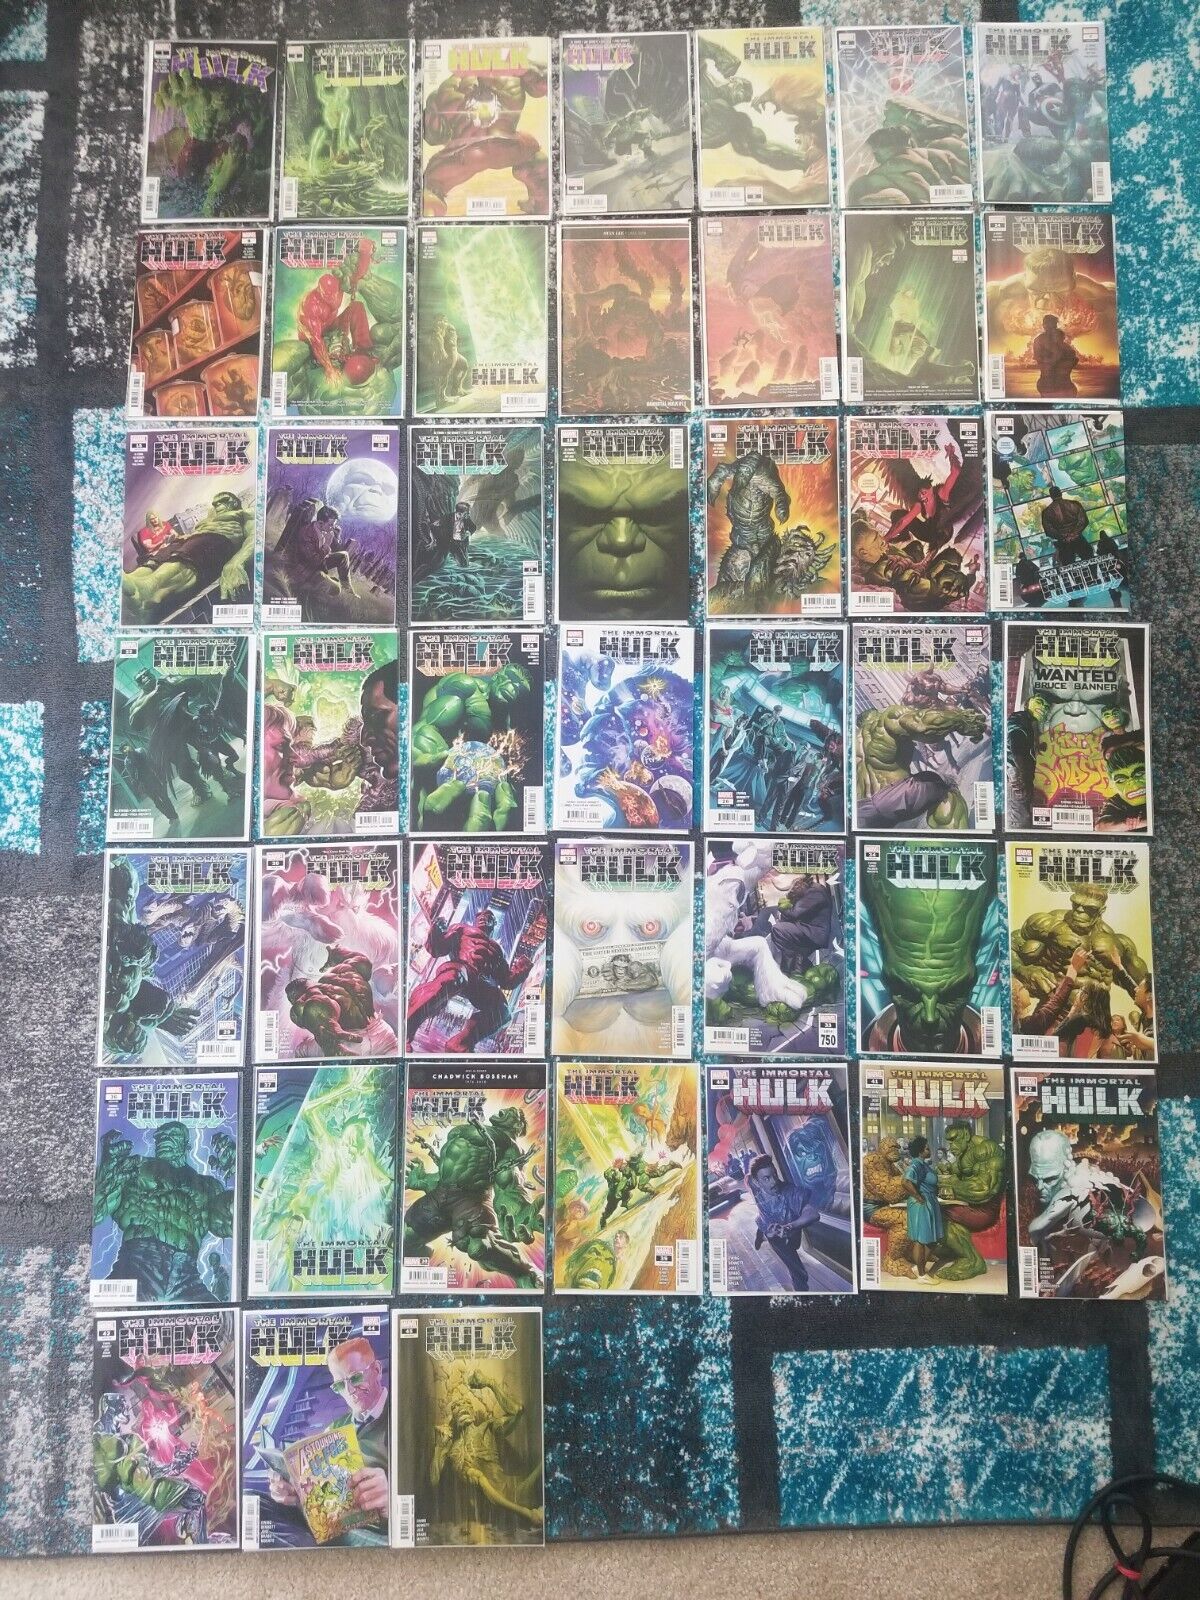 NM/NM+ IMMORTAL HULK LOT #1-46 COMPLETE FIRST PRINTS SET ALL COVER A 1 2 3 4 45